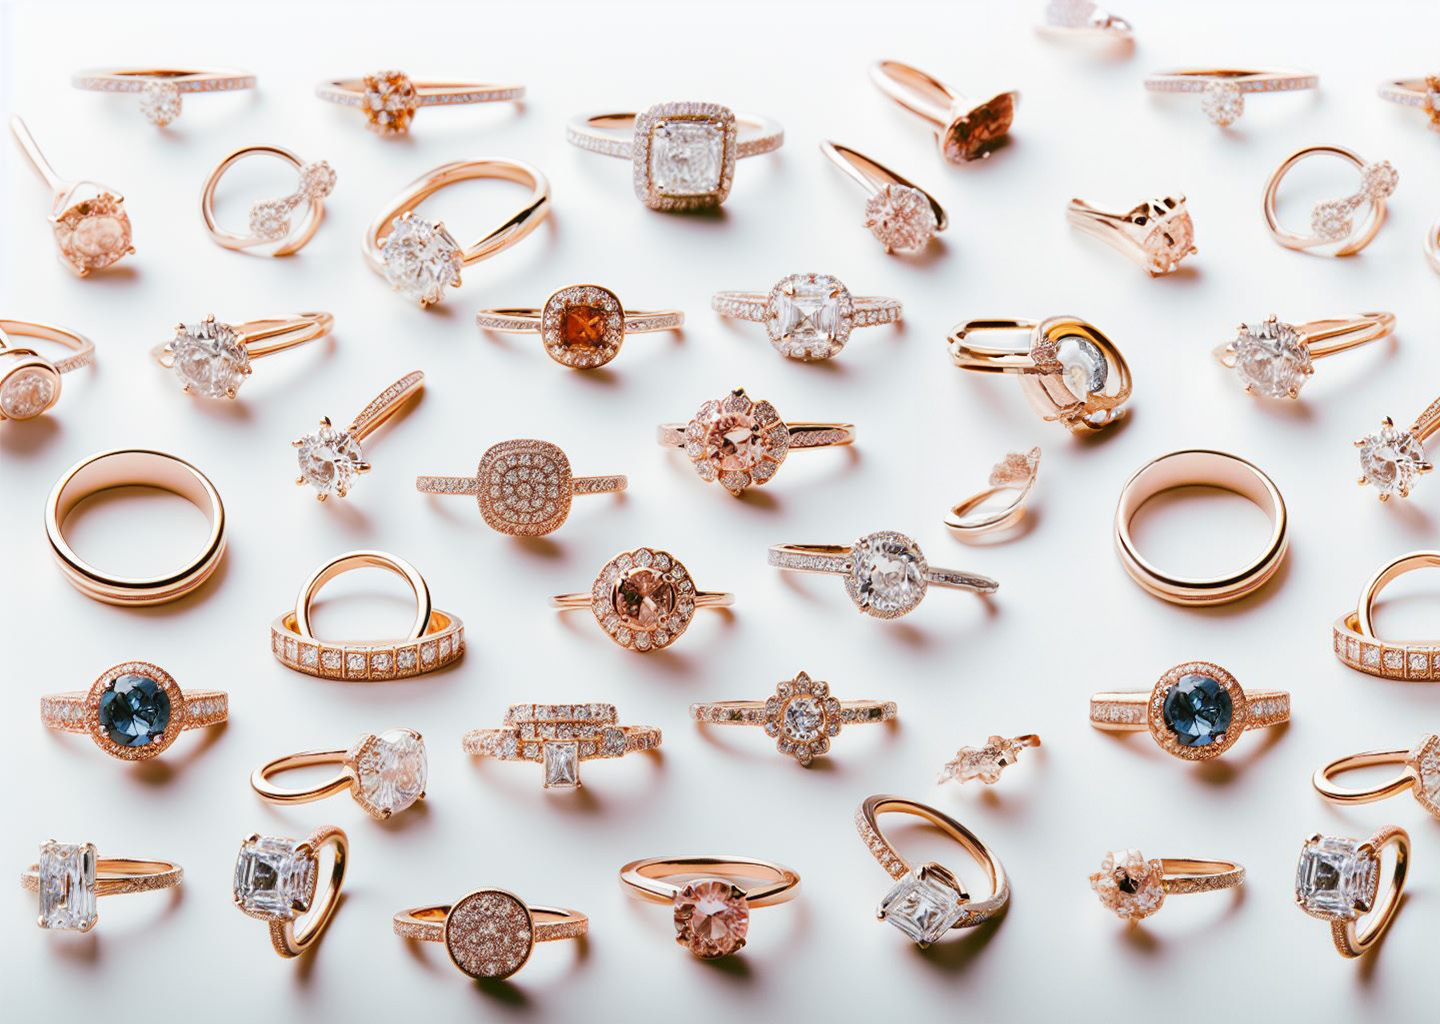 Rose Gold Engagement Rings | The Diamond Store USA